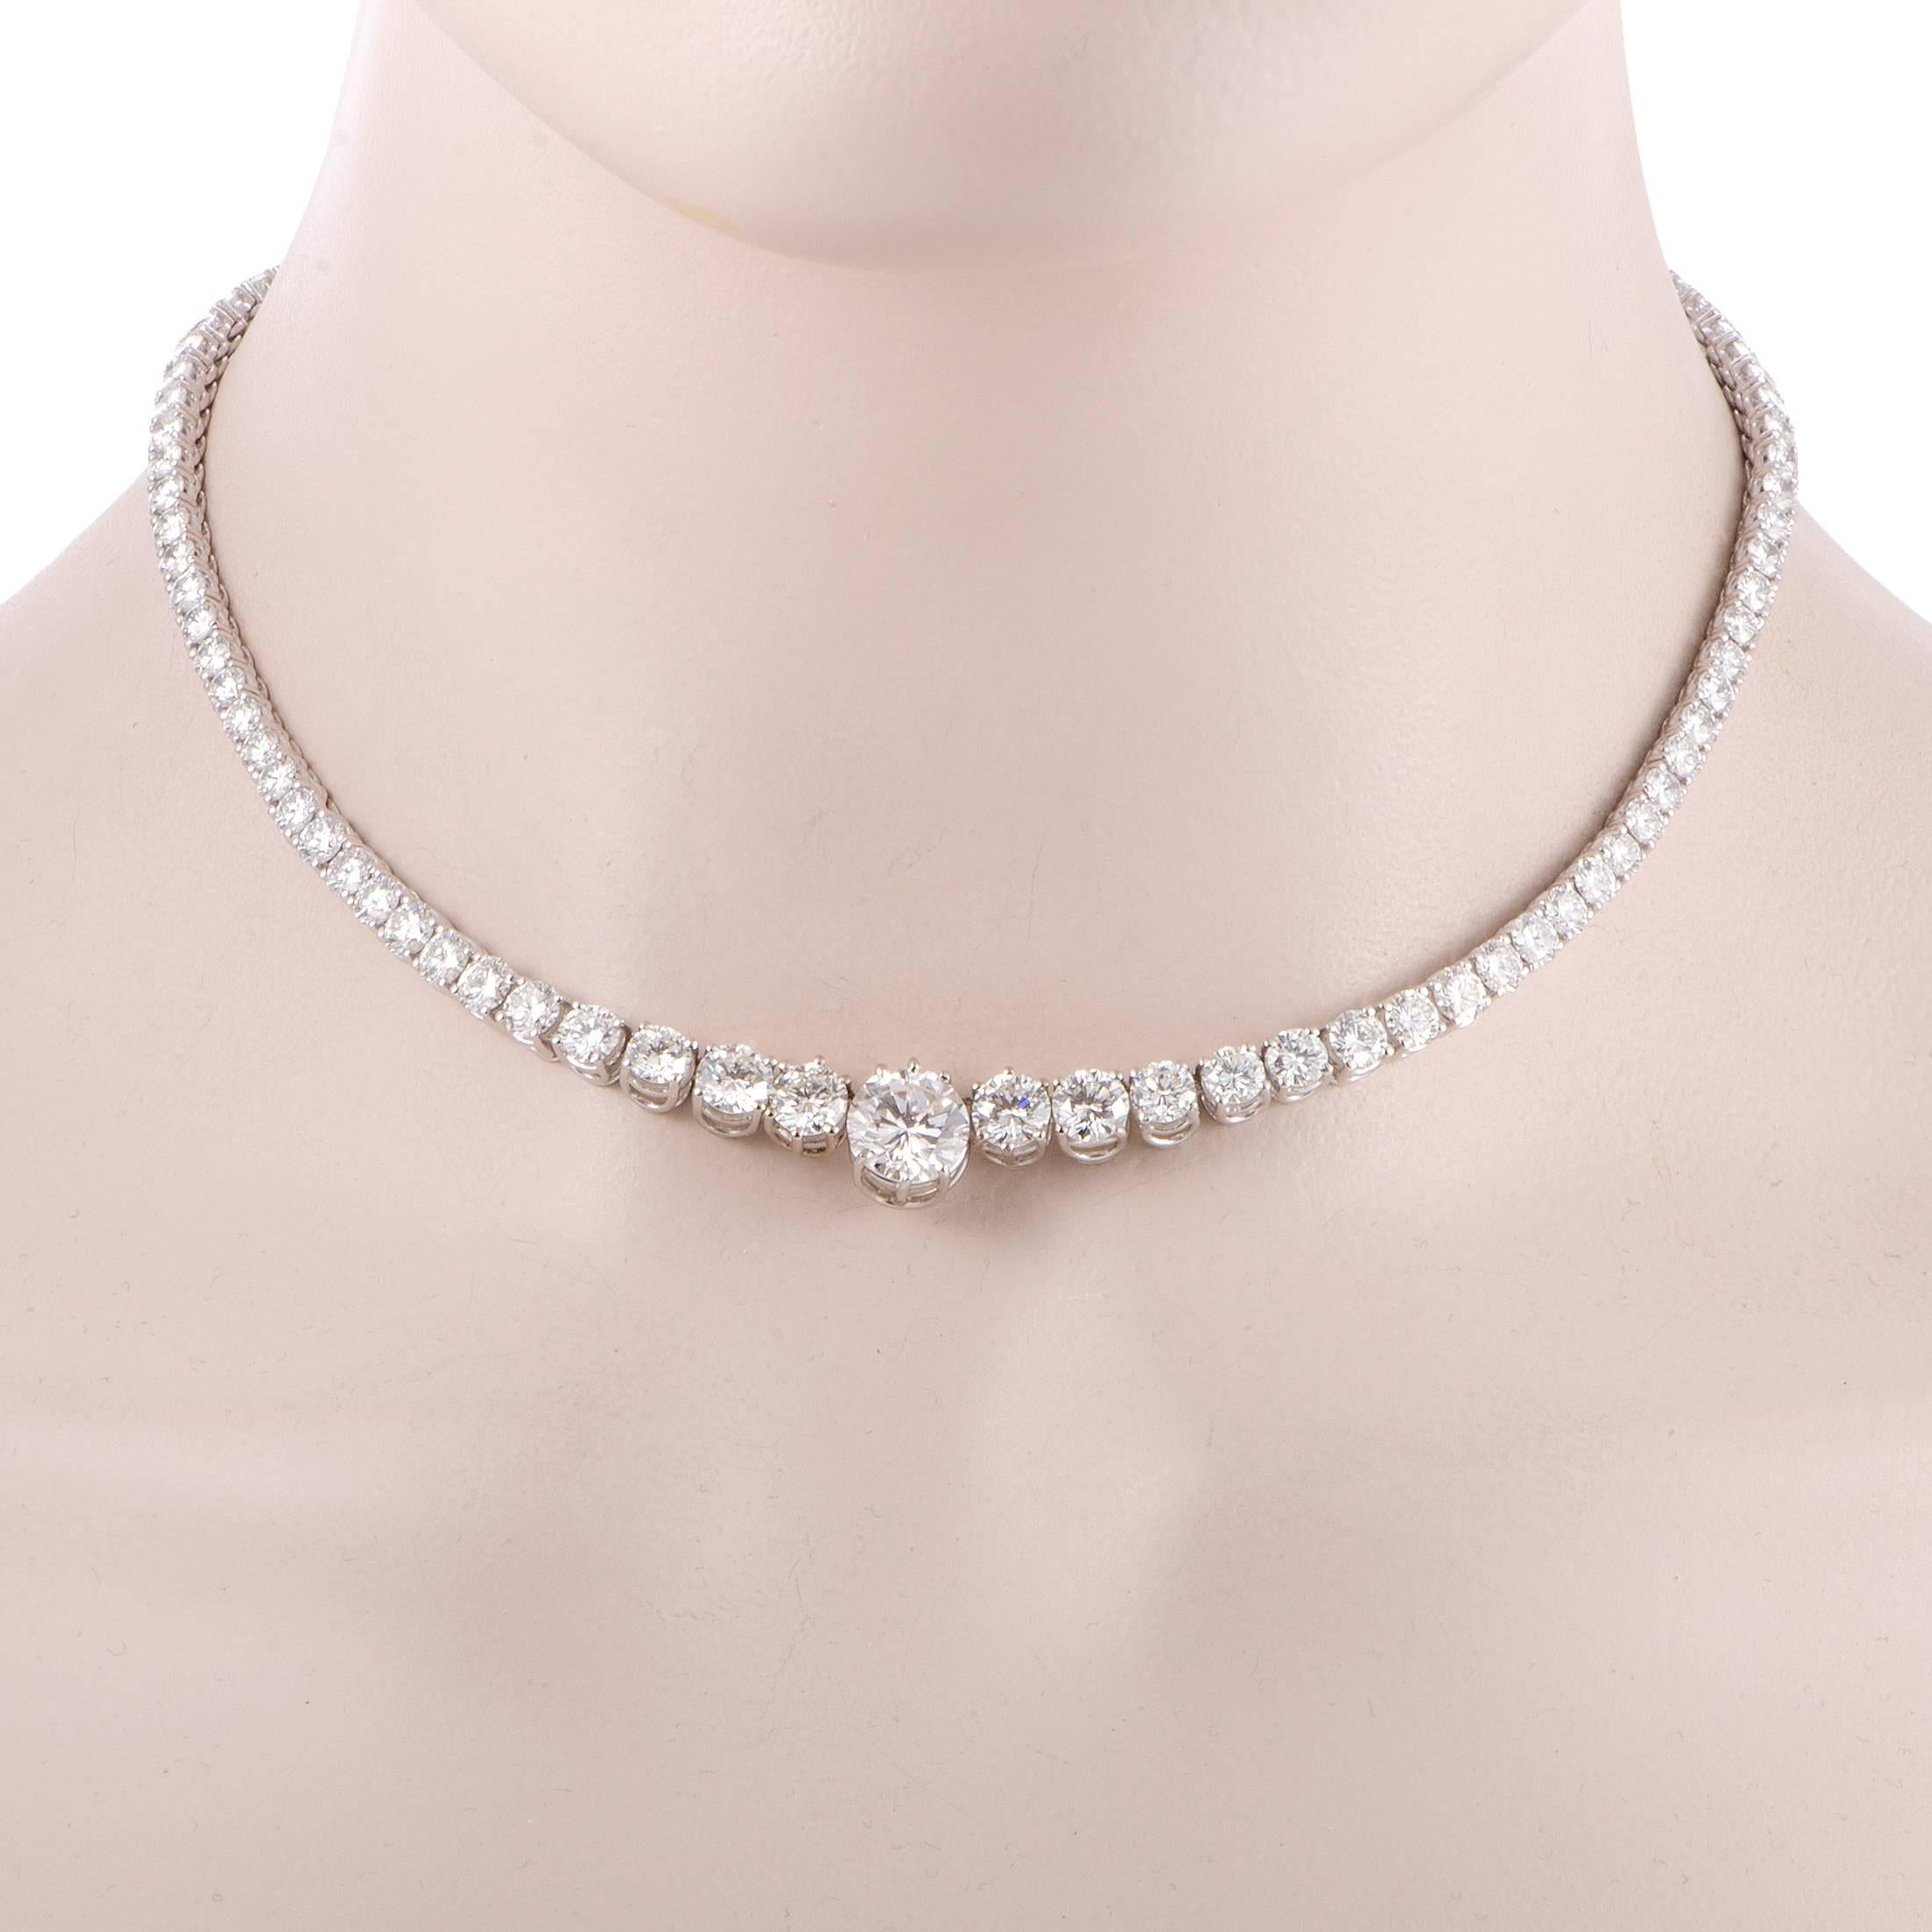 Lined with expertly cut and marvelously lustrous diamonds weighing in total 20.50 carats, this magnificent necklace is made of shimmering 18K white gold and boasts a majestic central F-color diamond of VVS1 clarity weighing 3.08 carats for a